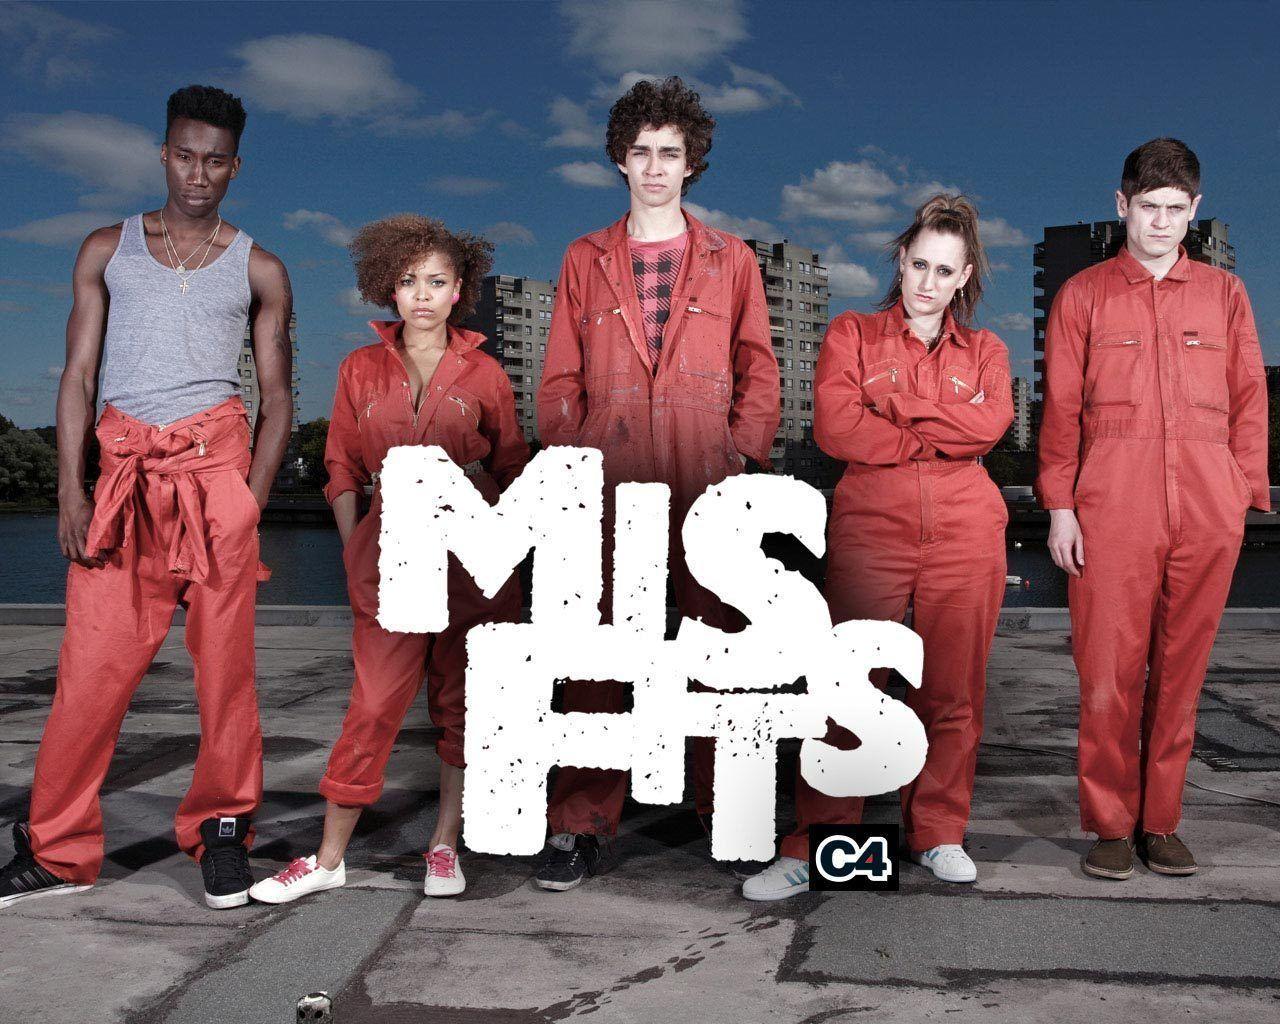 The Misfits awesome show, always looking forward to watching it